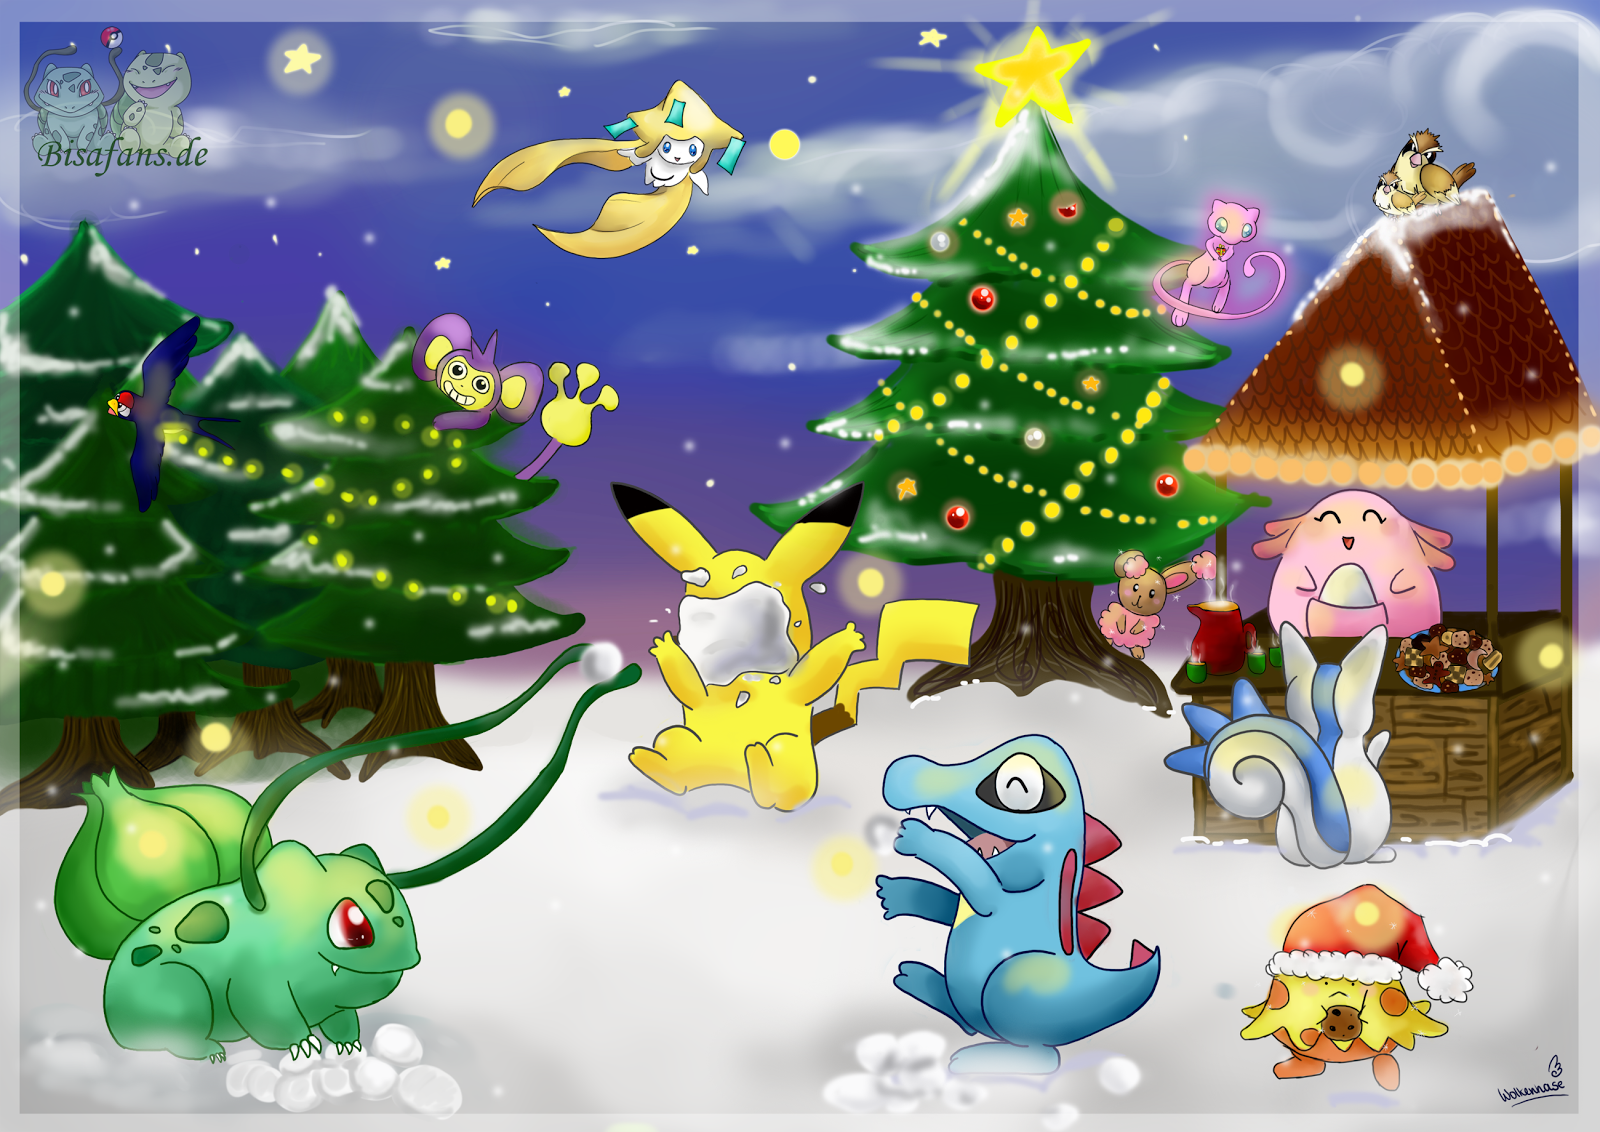 Pin by Cold Coin on Quick Saves  Pokemon Cute pokemon wallpaper Christmas  pokemon